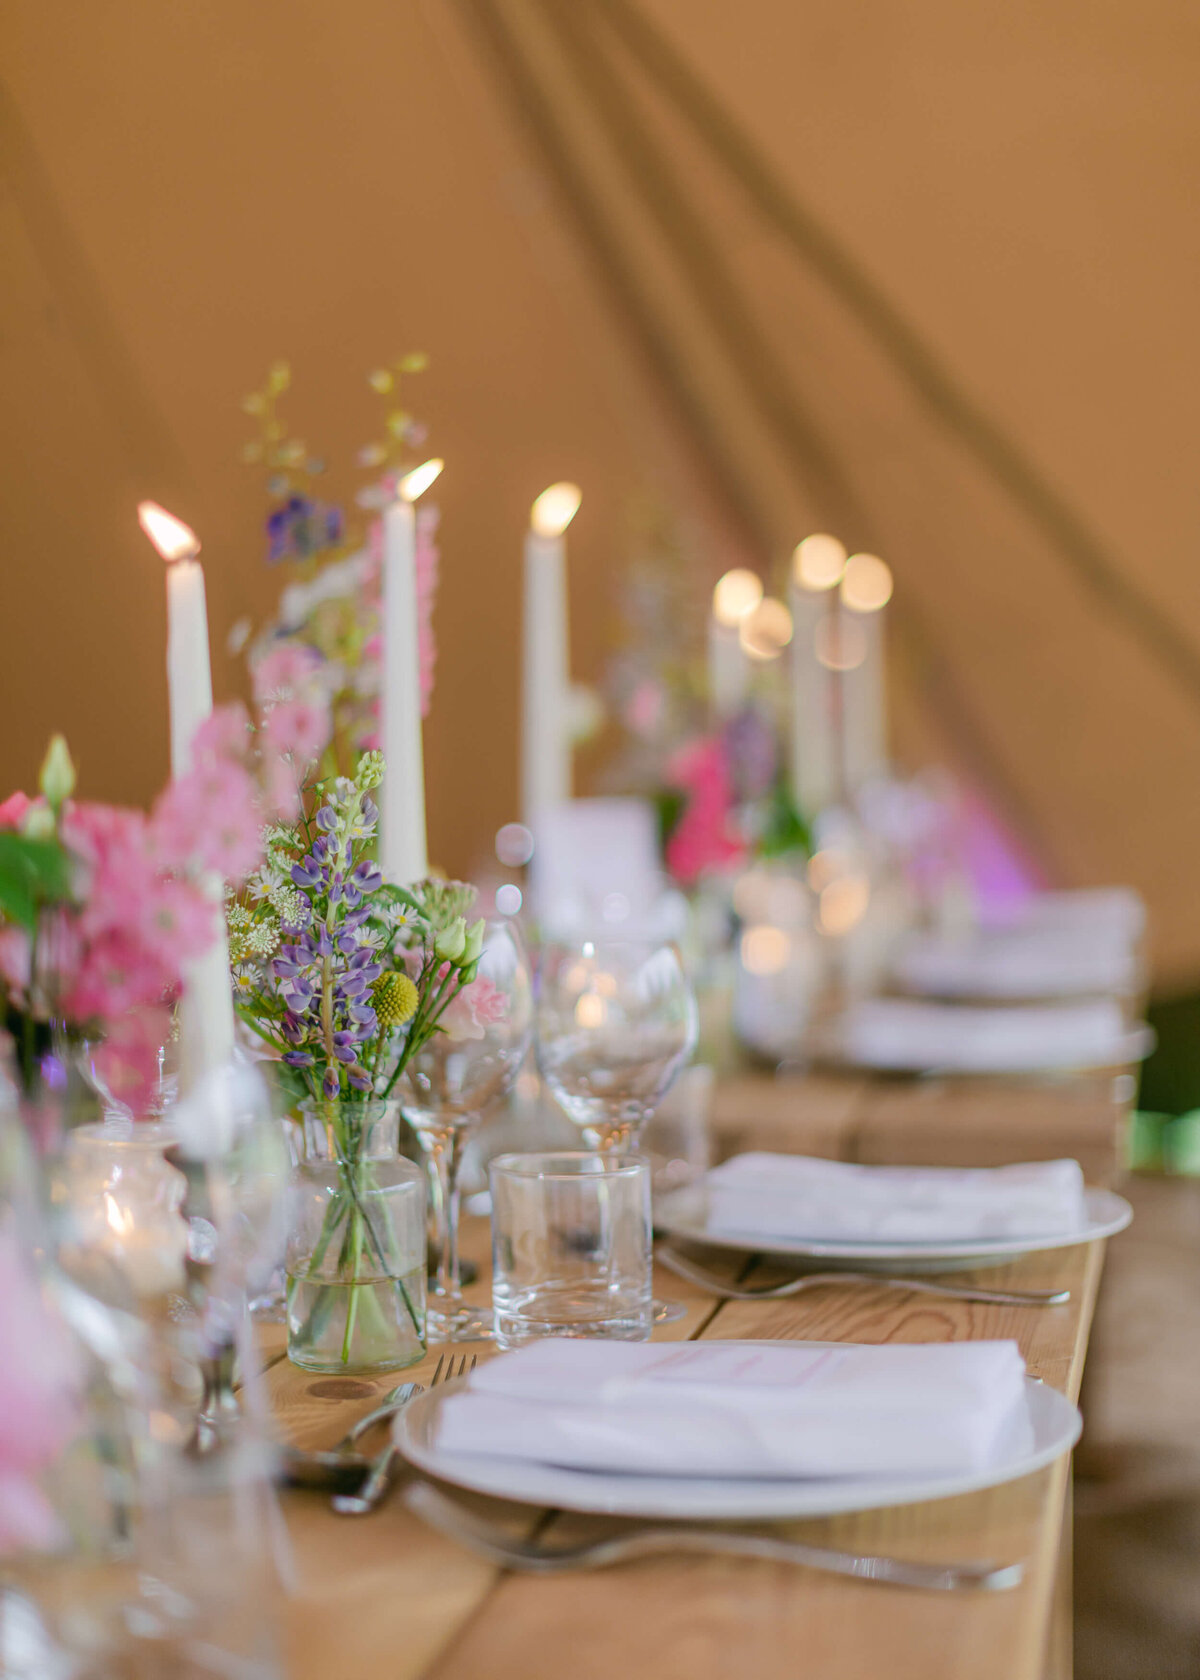 events-birthday-party-gsp-table-setting-candlesticks